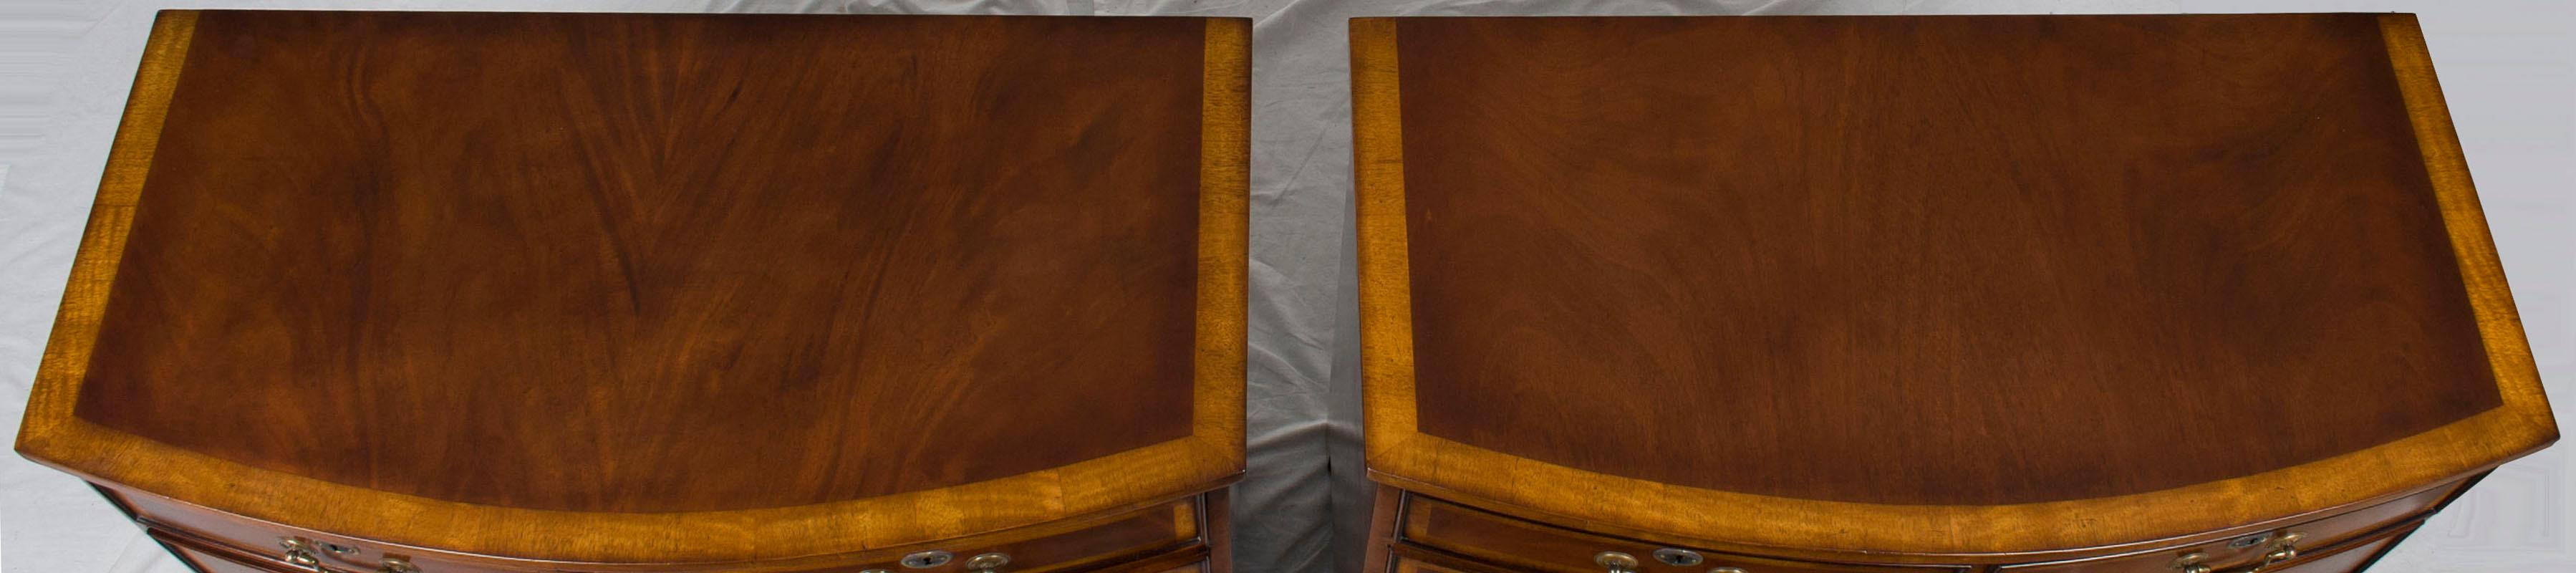 Georgian Pair of Bow Front Chest of Drawers Dressers or Large Nightstands in Mahogany